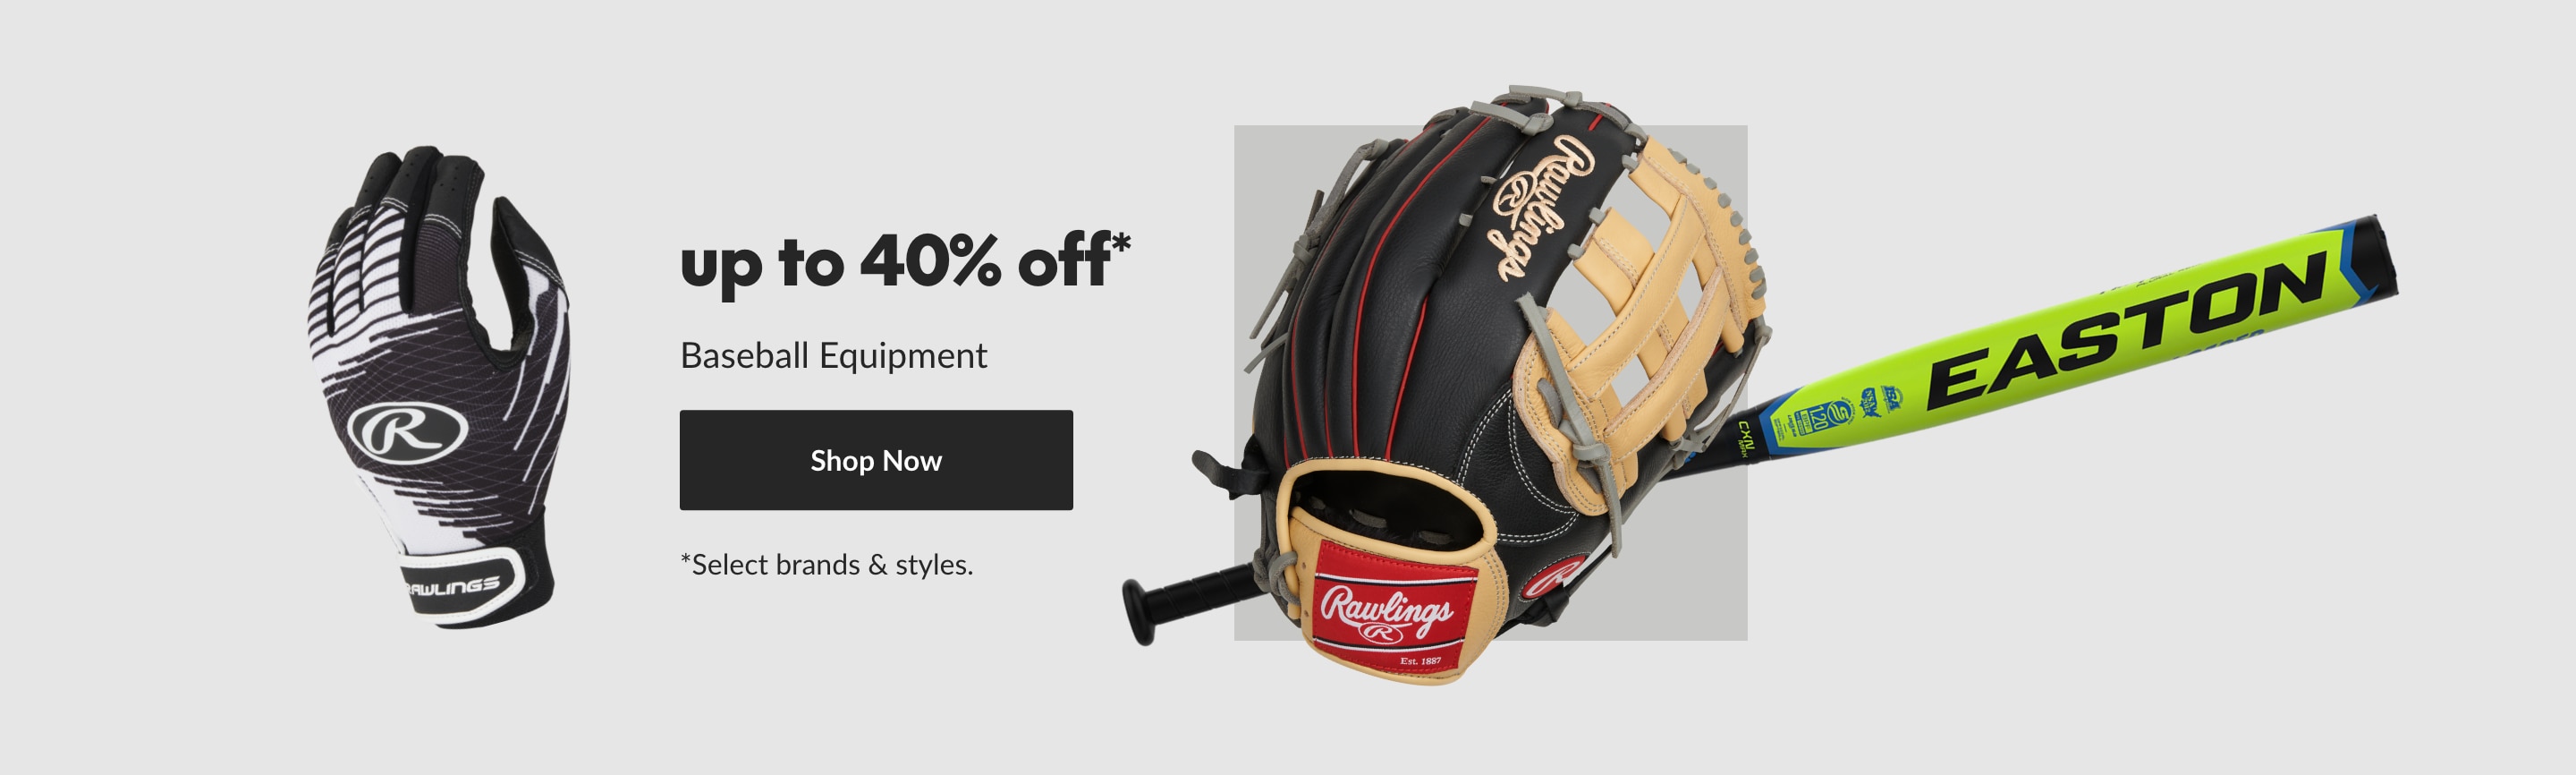 Baseball Equipment Up to 40% Off*